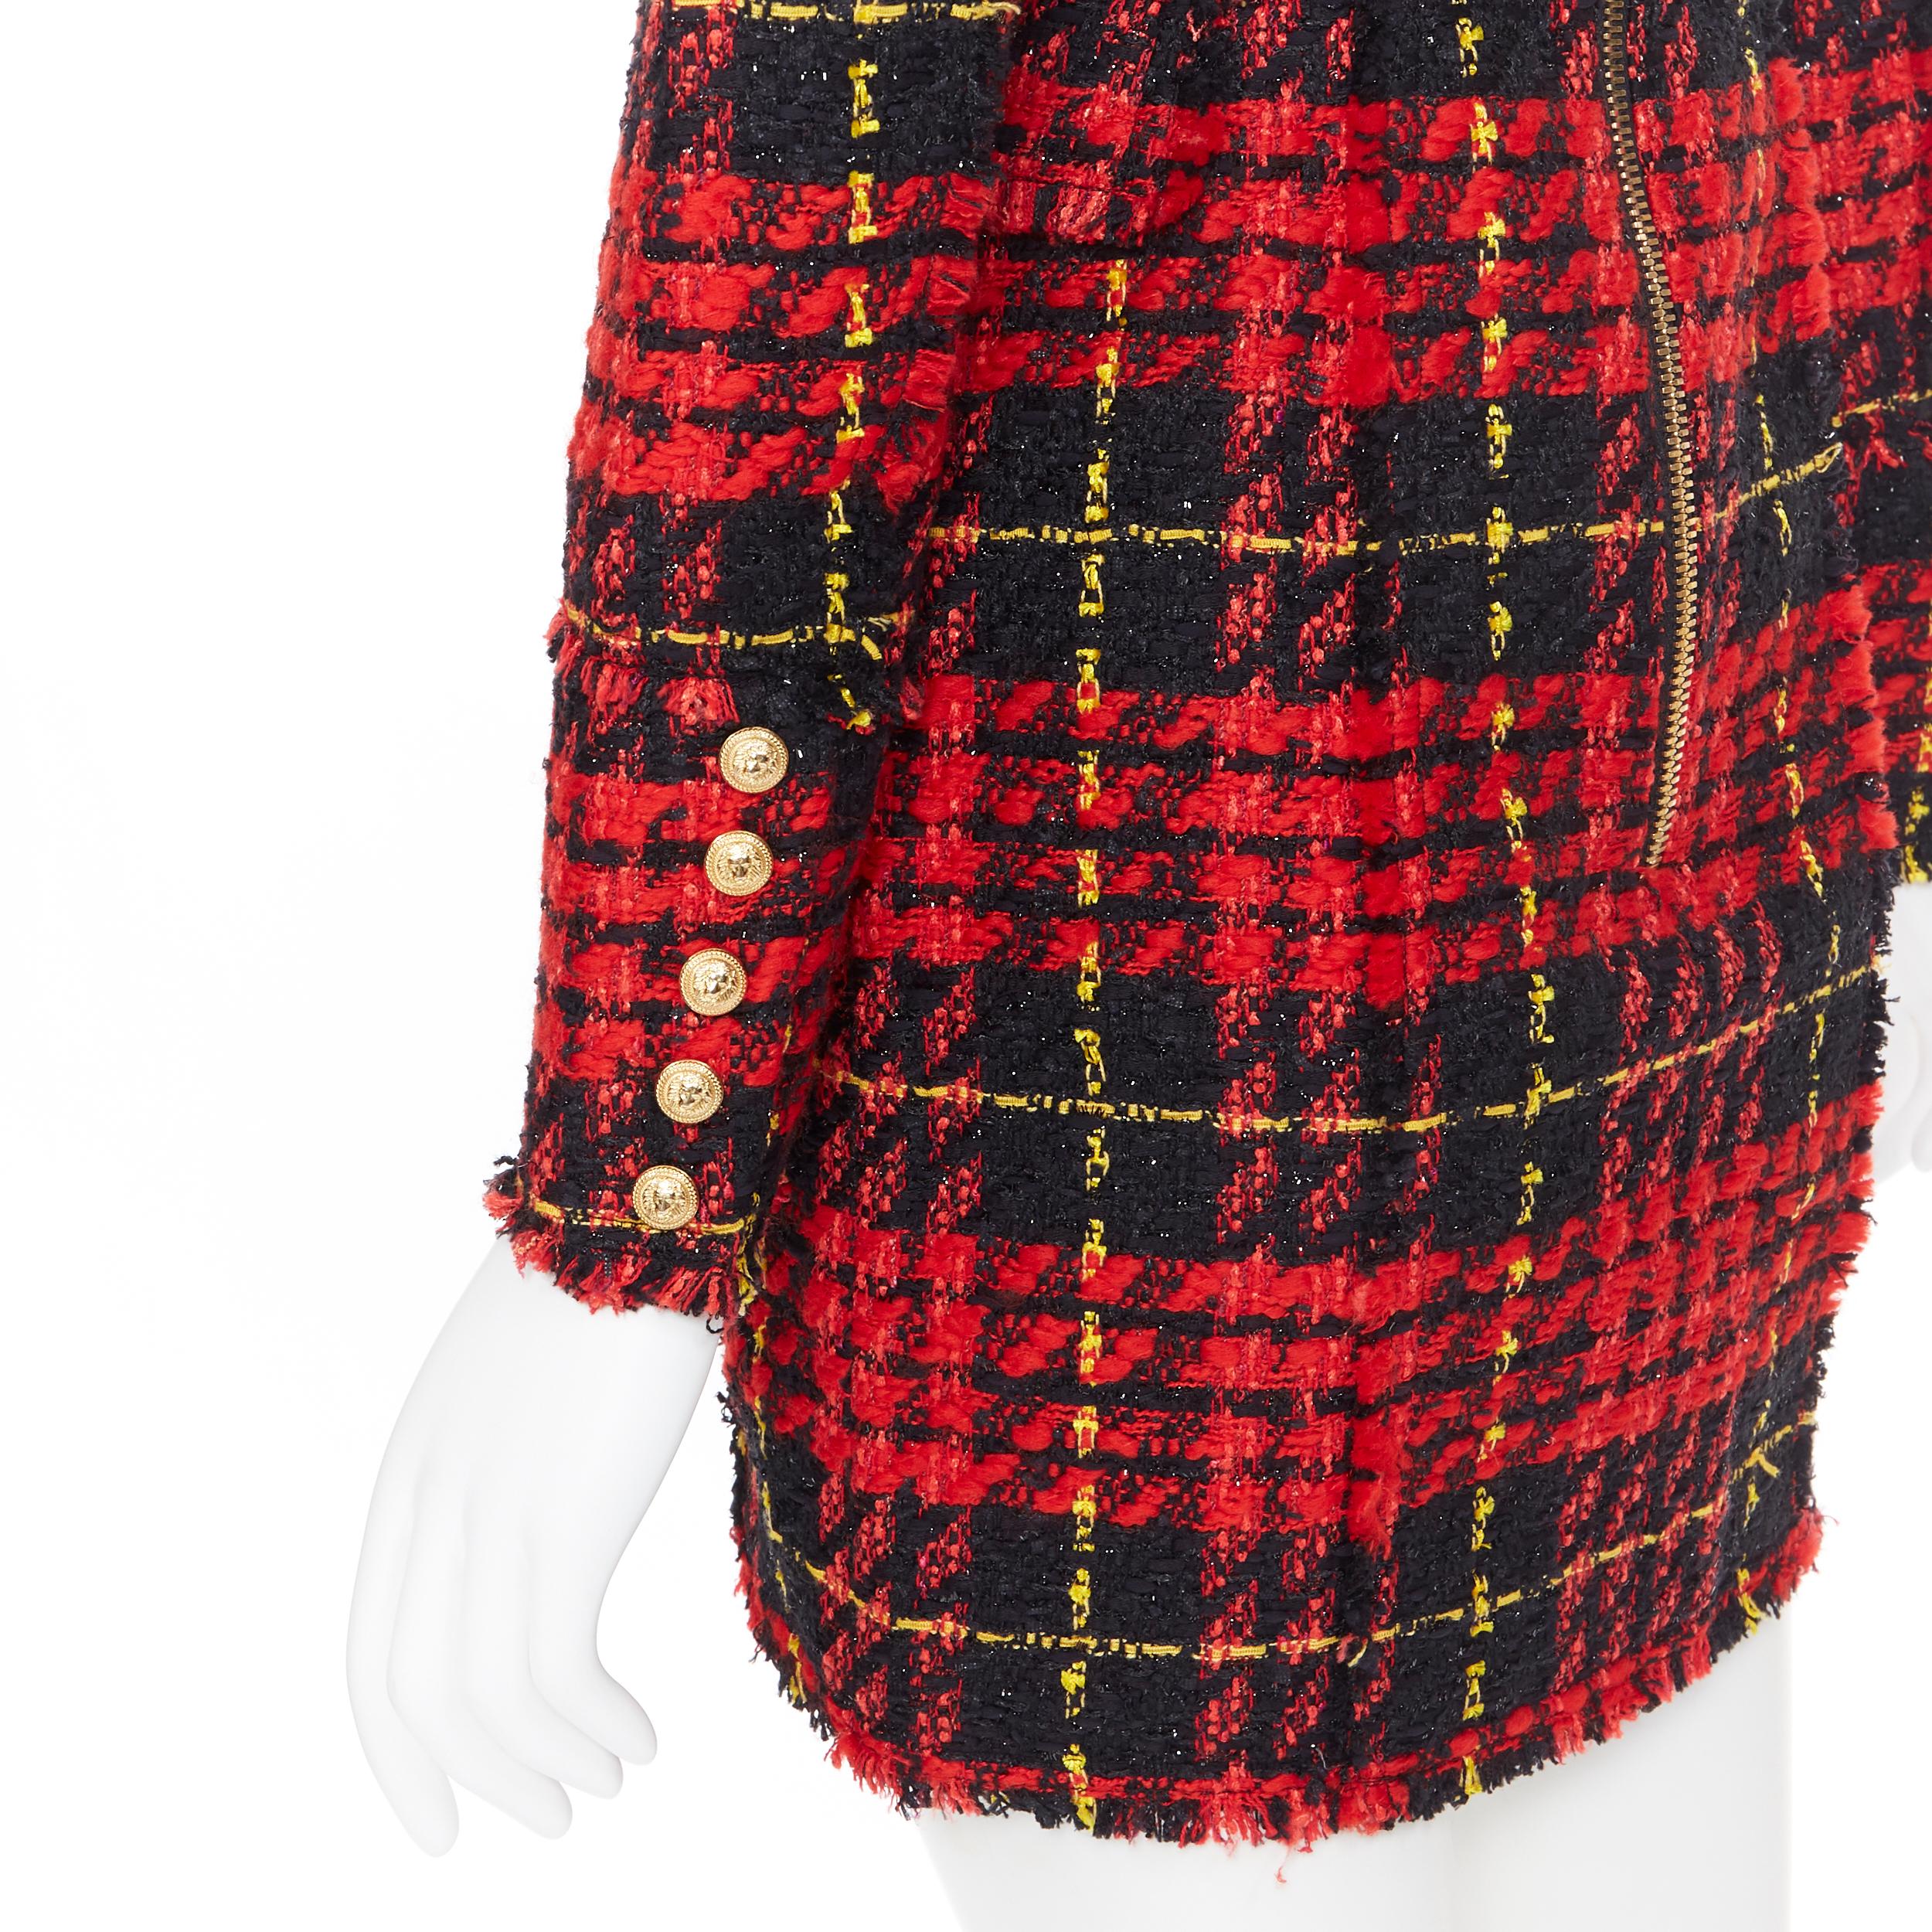 new BALMAIN Runway red black checked tweed double breasted military dress FR34 2